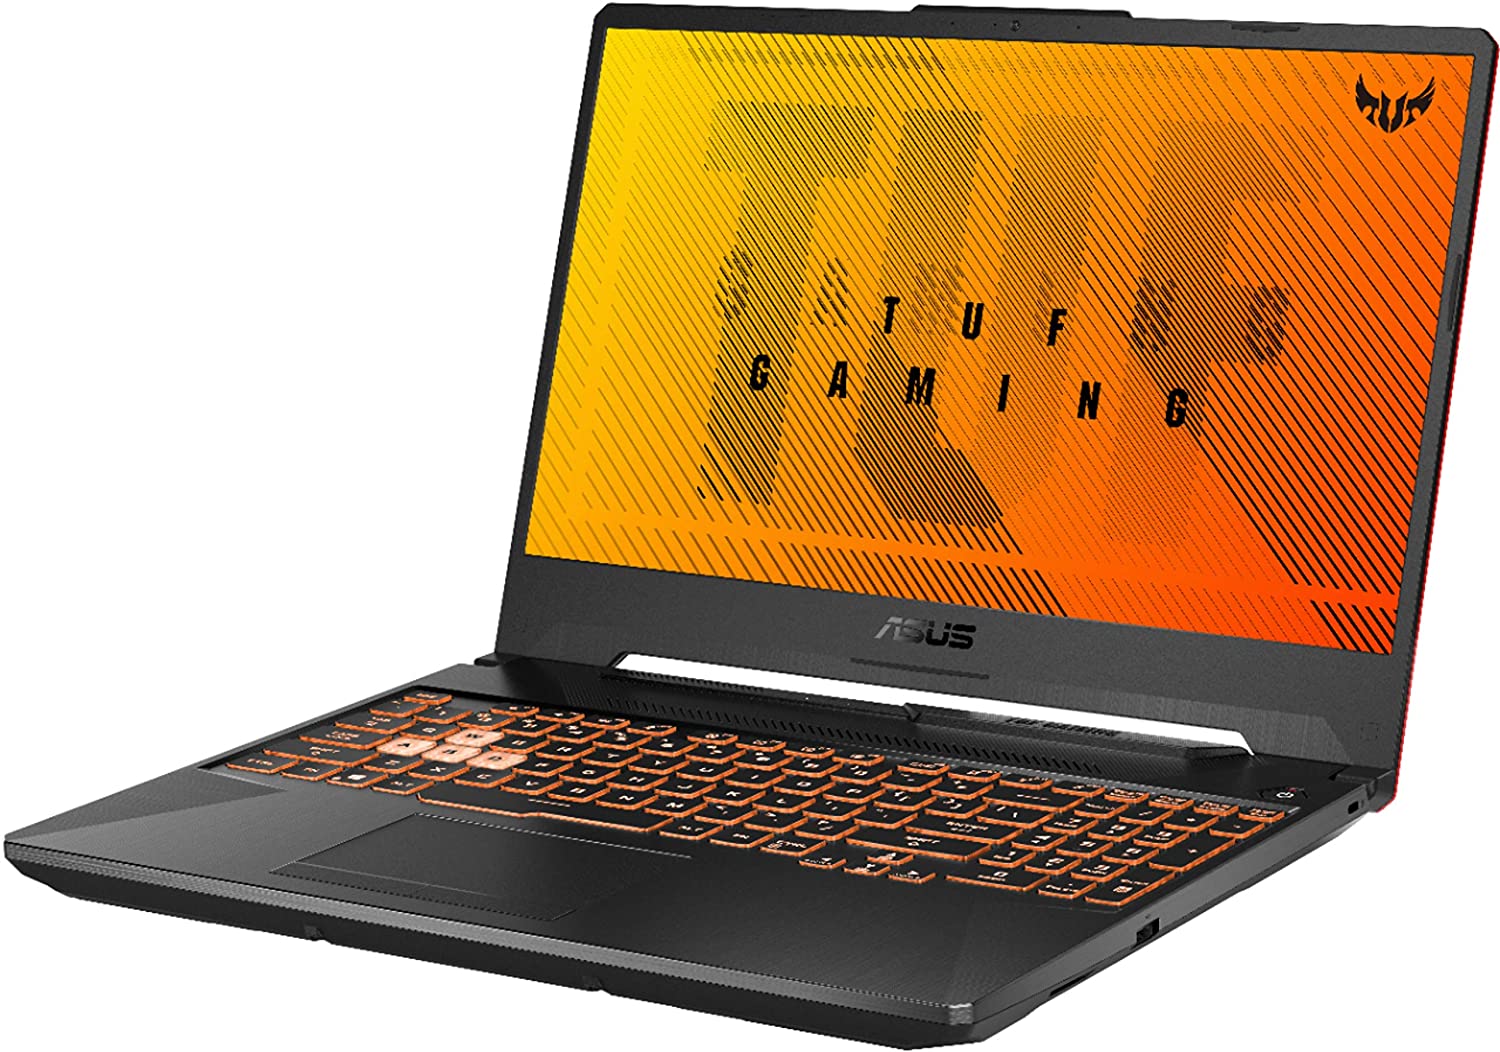 ASUS TUF Gaming 15 6 Full HD Laptop Intel Core i5 10300H 8GB Memory 256GB SSD NVIDIA GeForce GTX 1650 Ti Black 15 15 99 inches - DealYaSteal